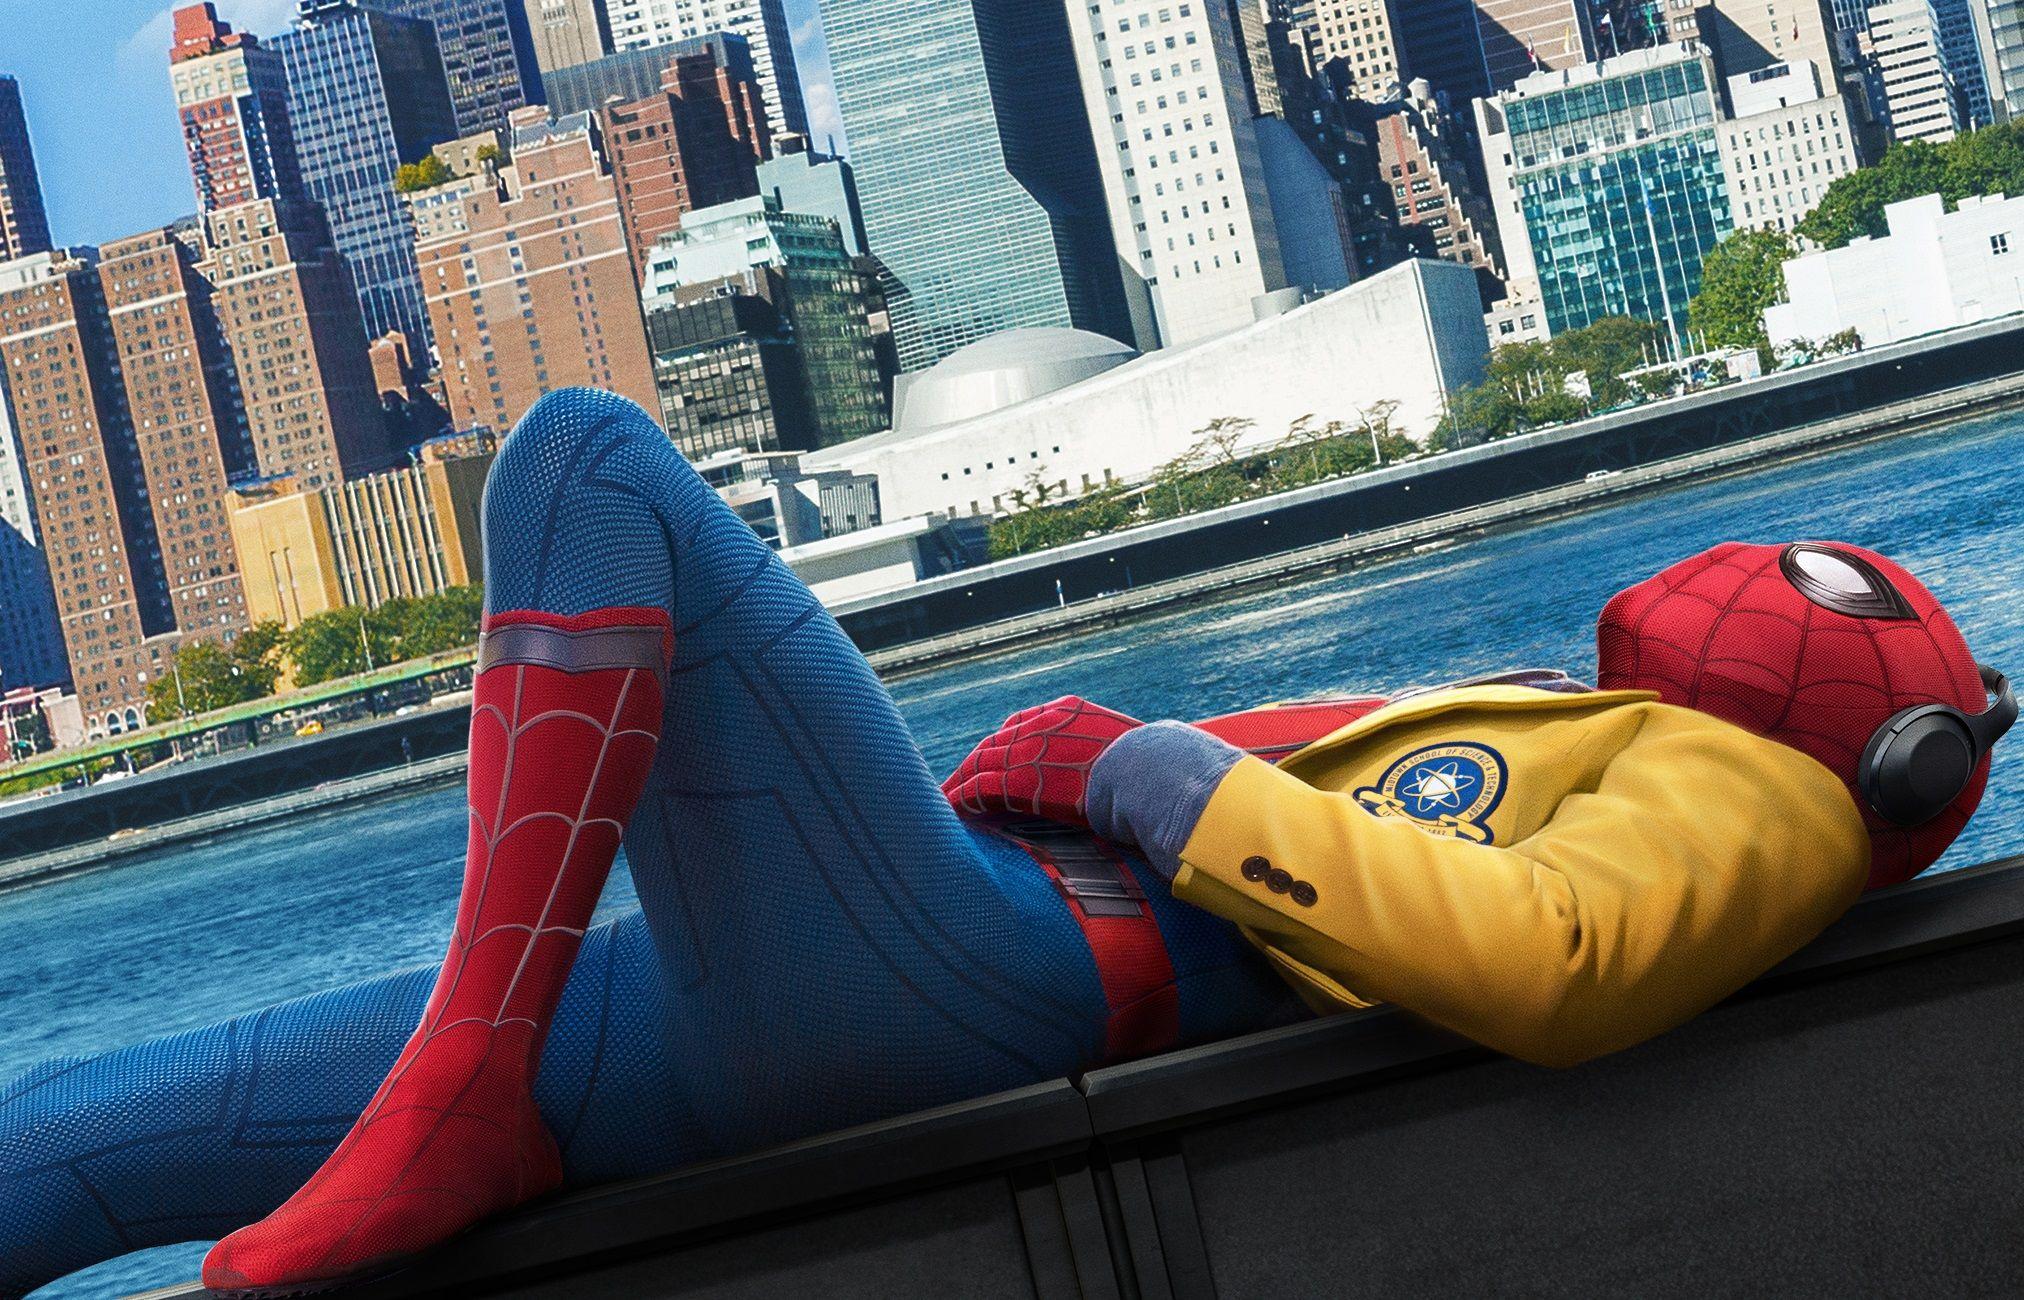 Spider-Man: Homecoming for ios download free